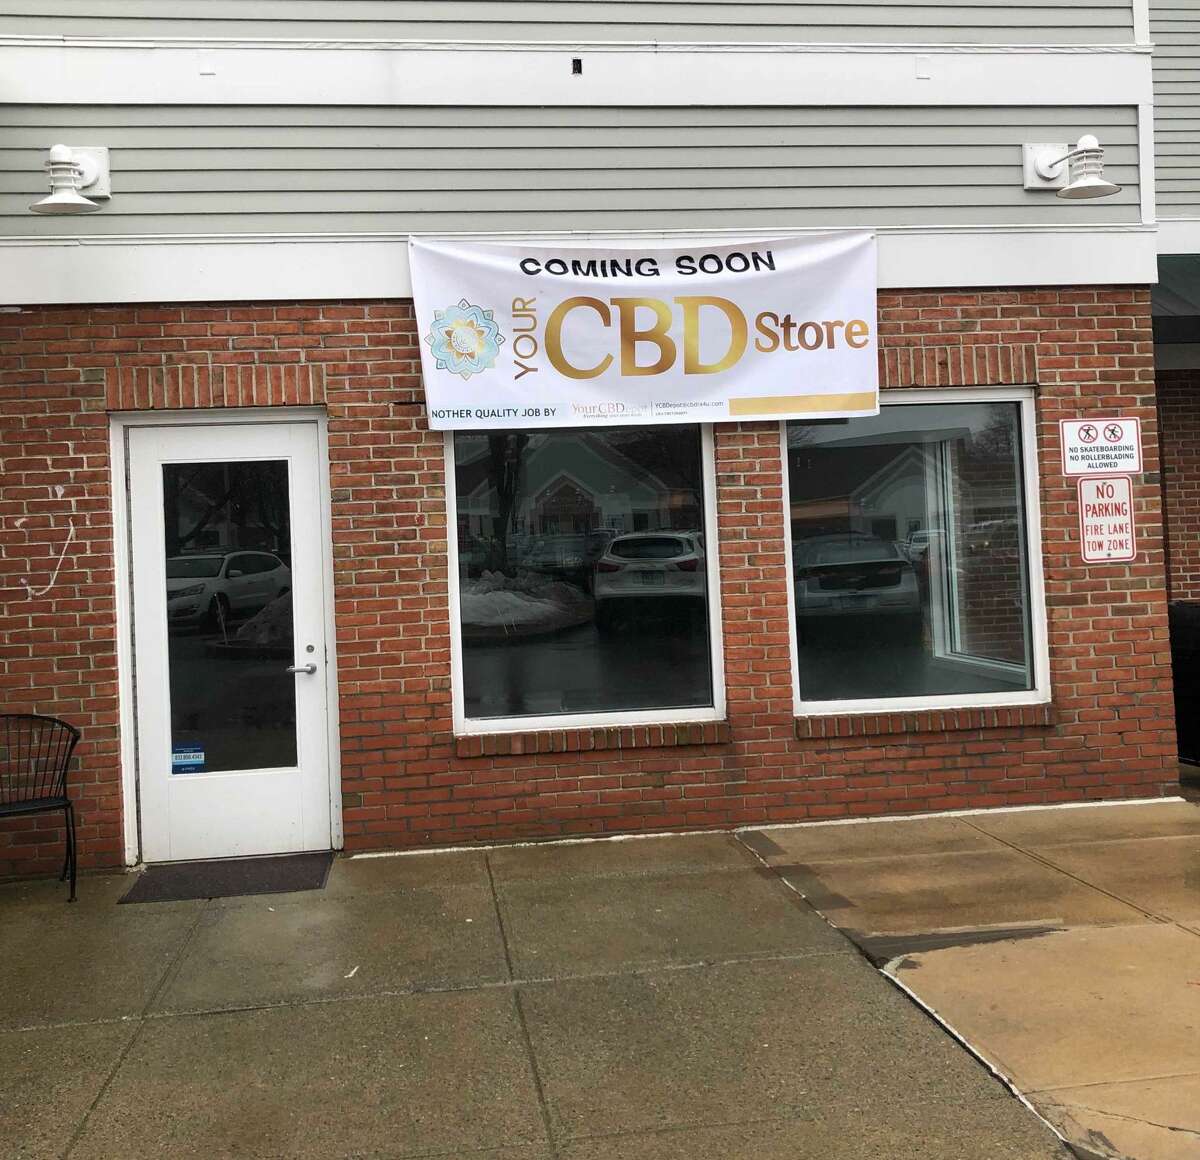 A Your CBD Store is expected to open soon in Wilton.